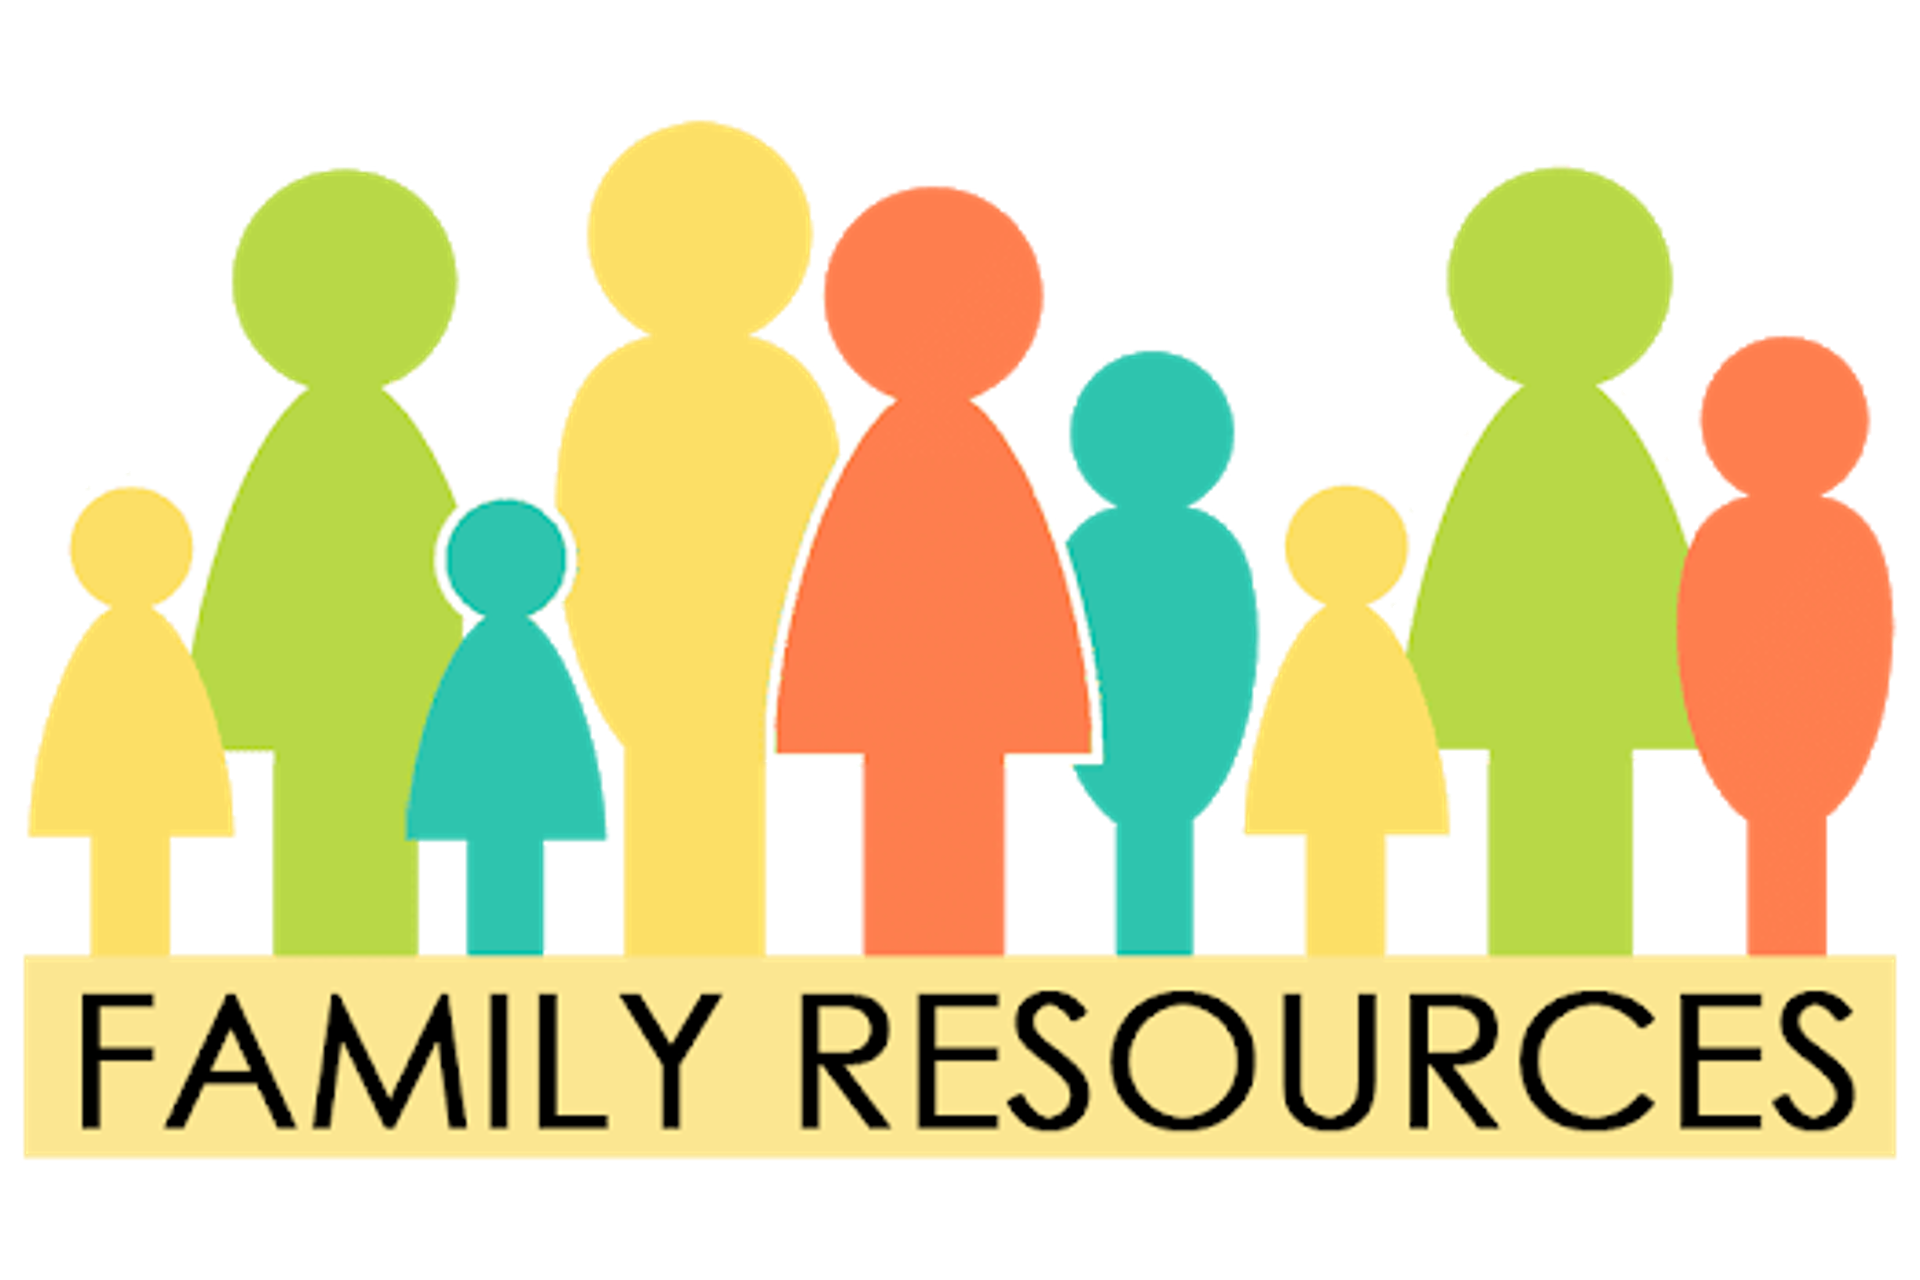 Online resources for families